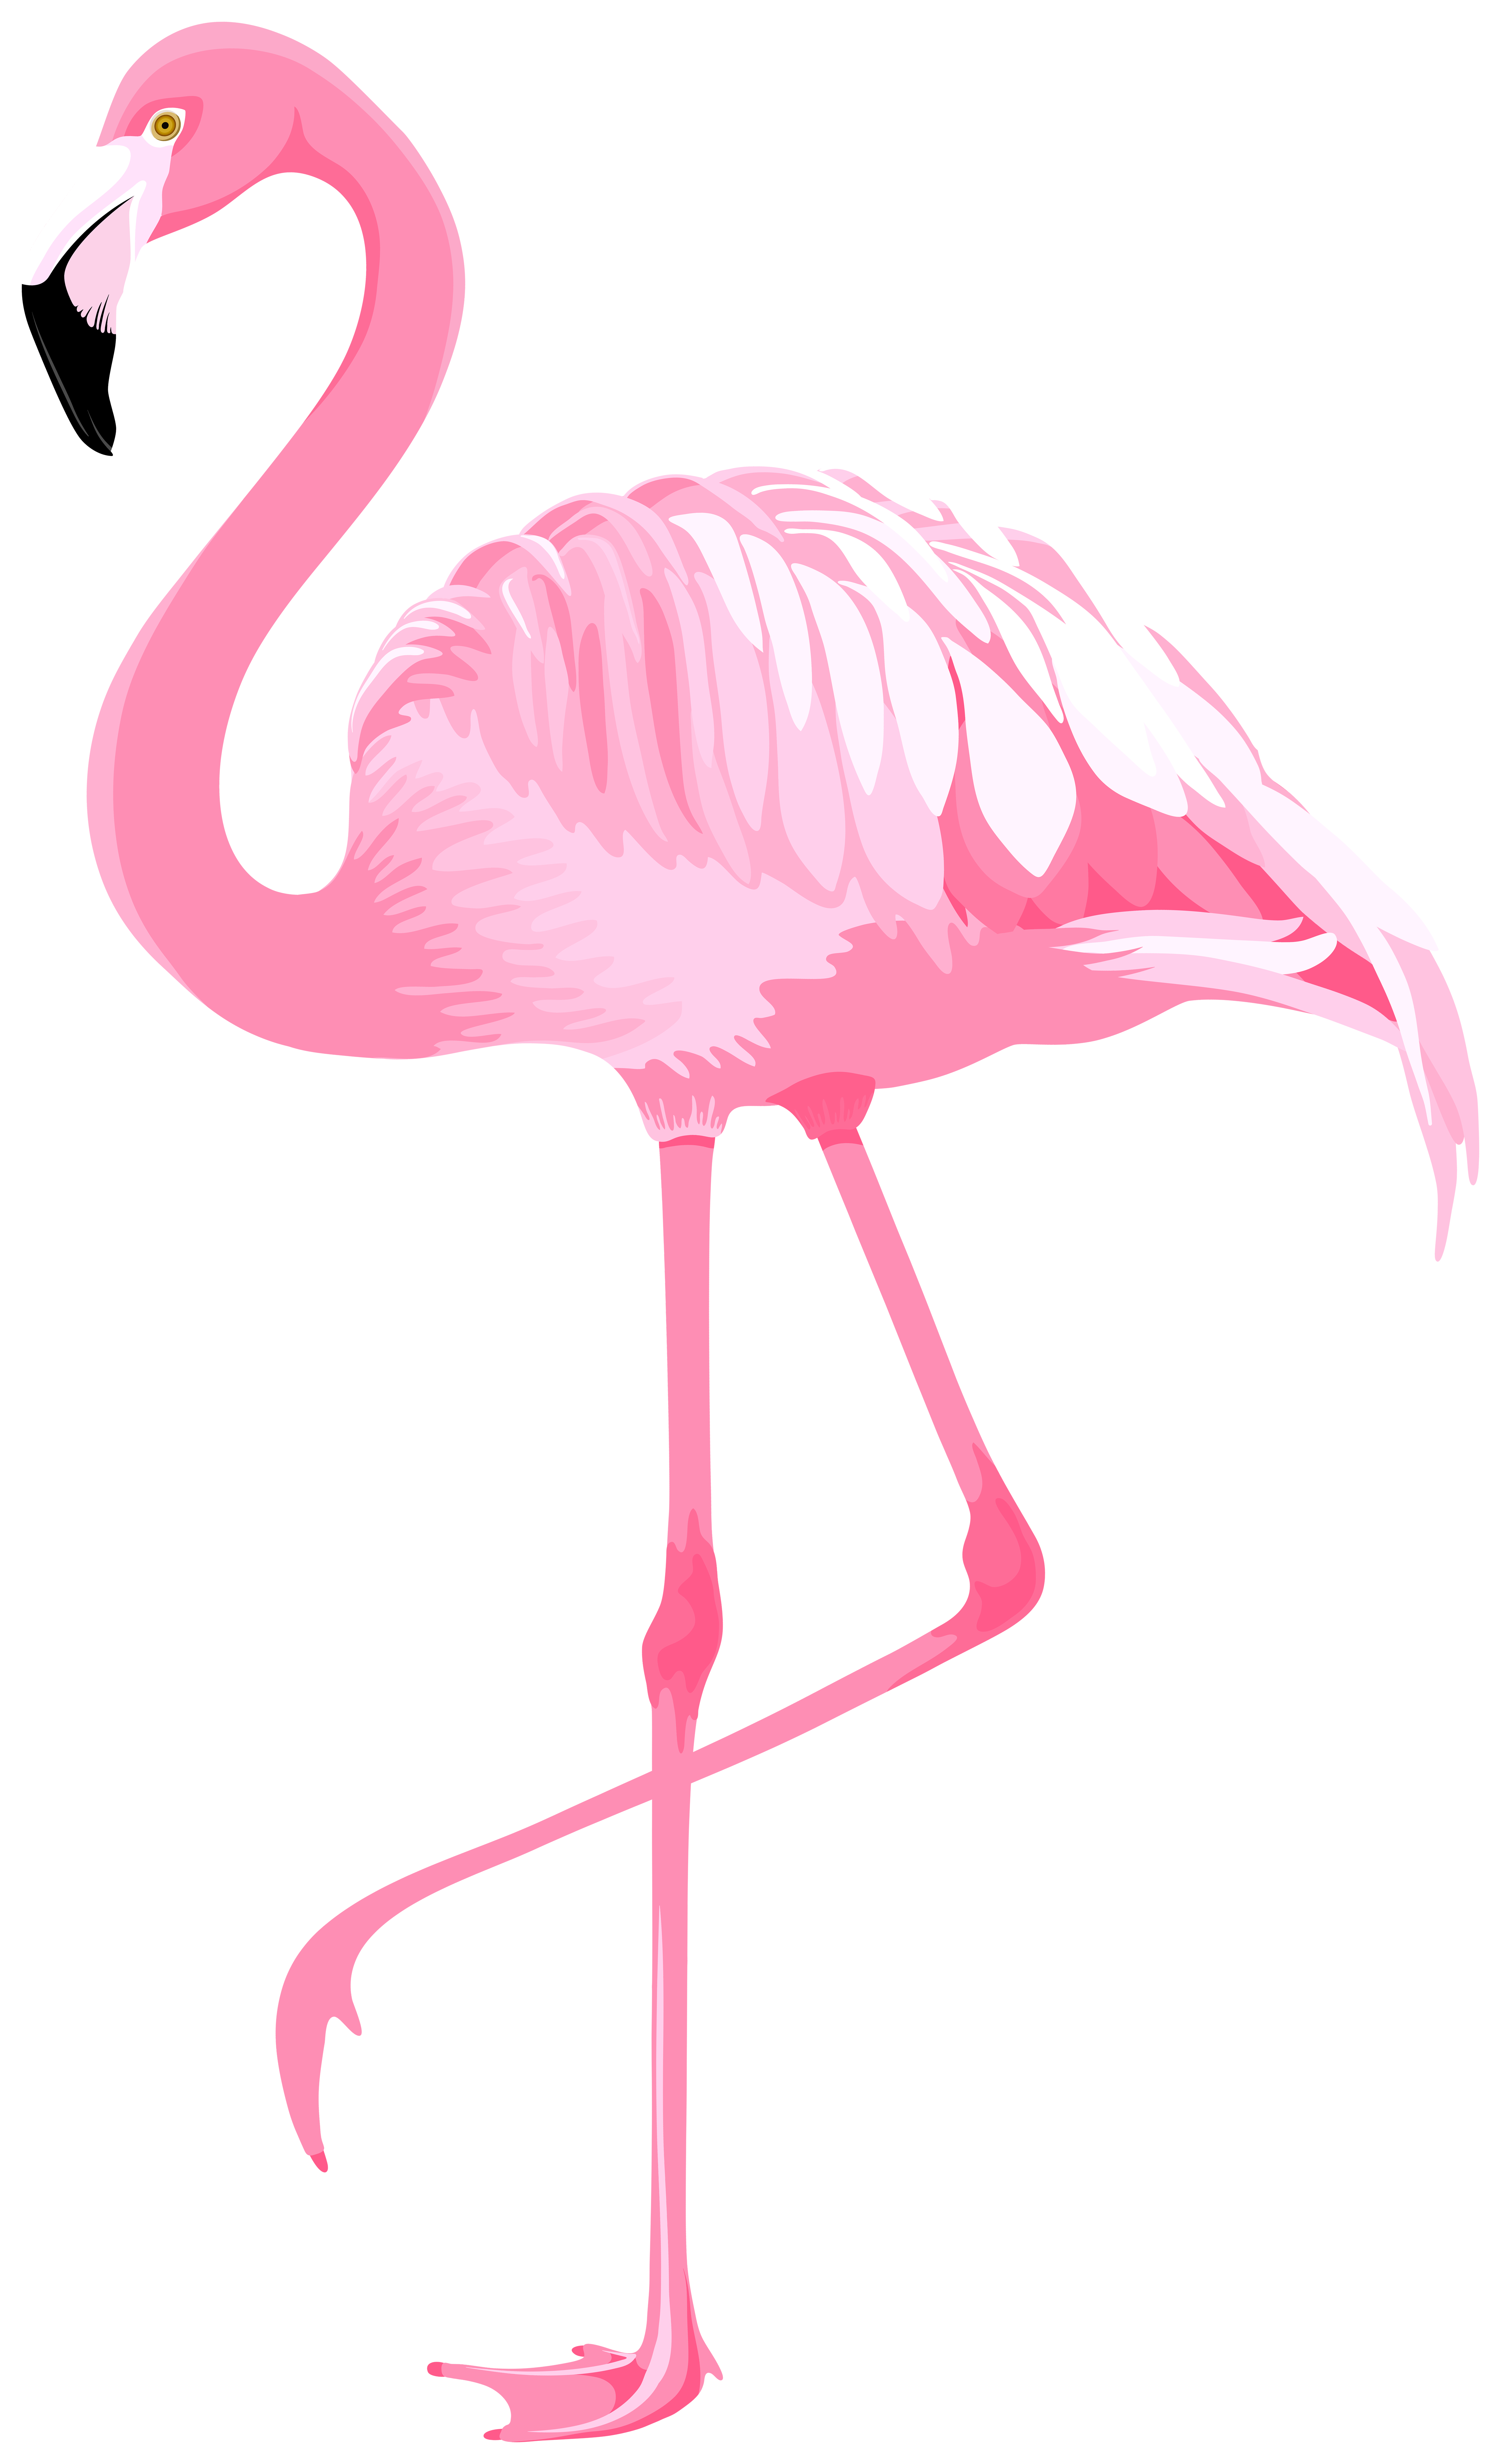 https://gallery.yopriceville.com/var/albums/Free-Clipart-Pictures/Birds-PNG/Pink_Flamingo_PNG_Clipart.png?m=1564041546